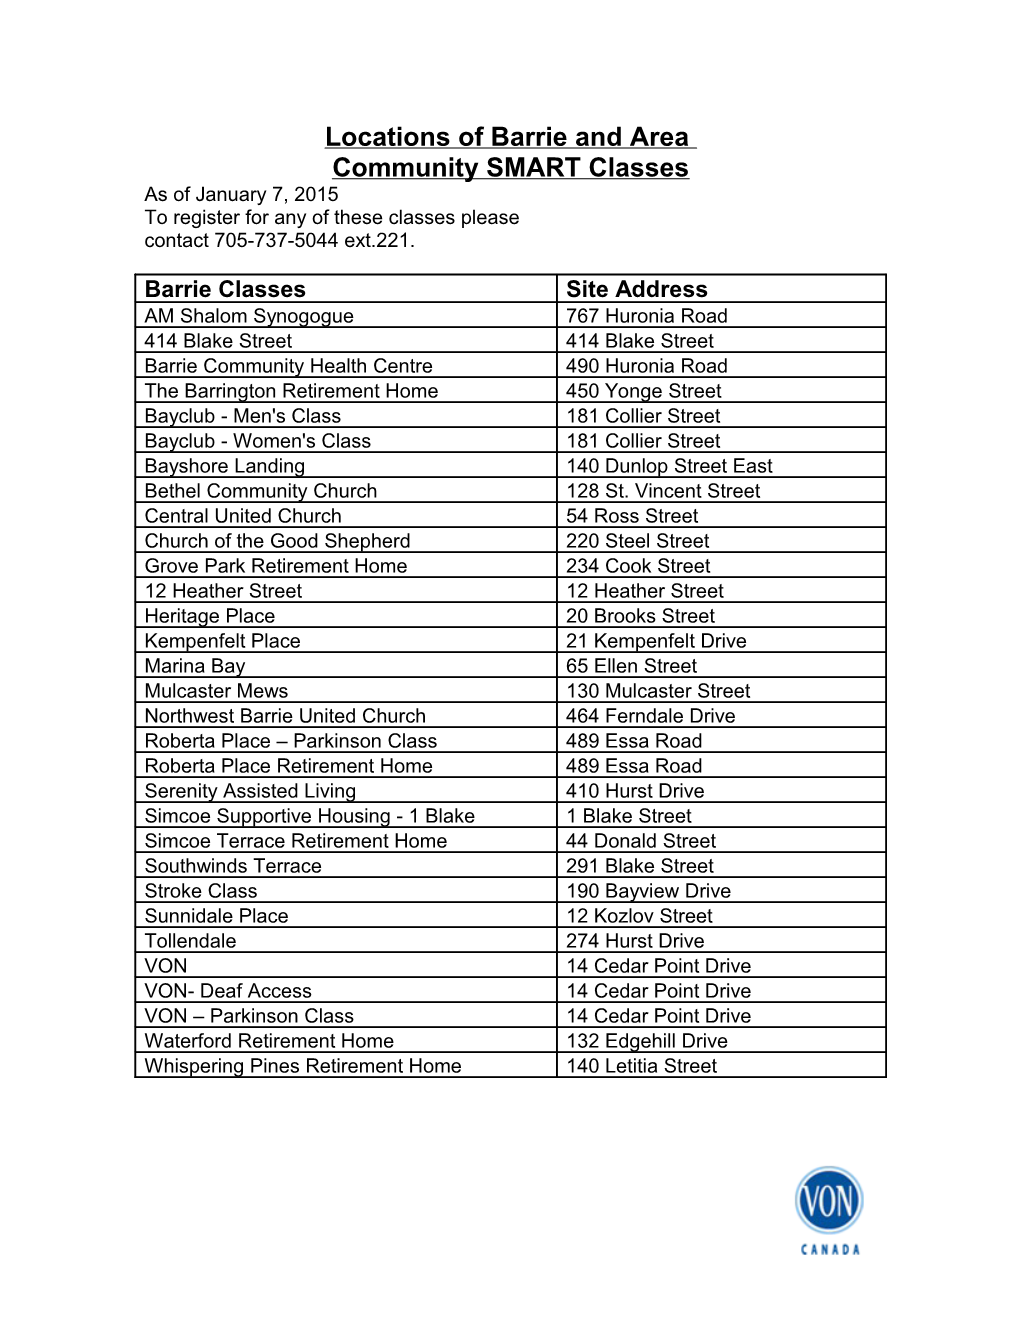 Locations of Our Community SMART Classes s1